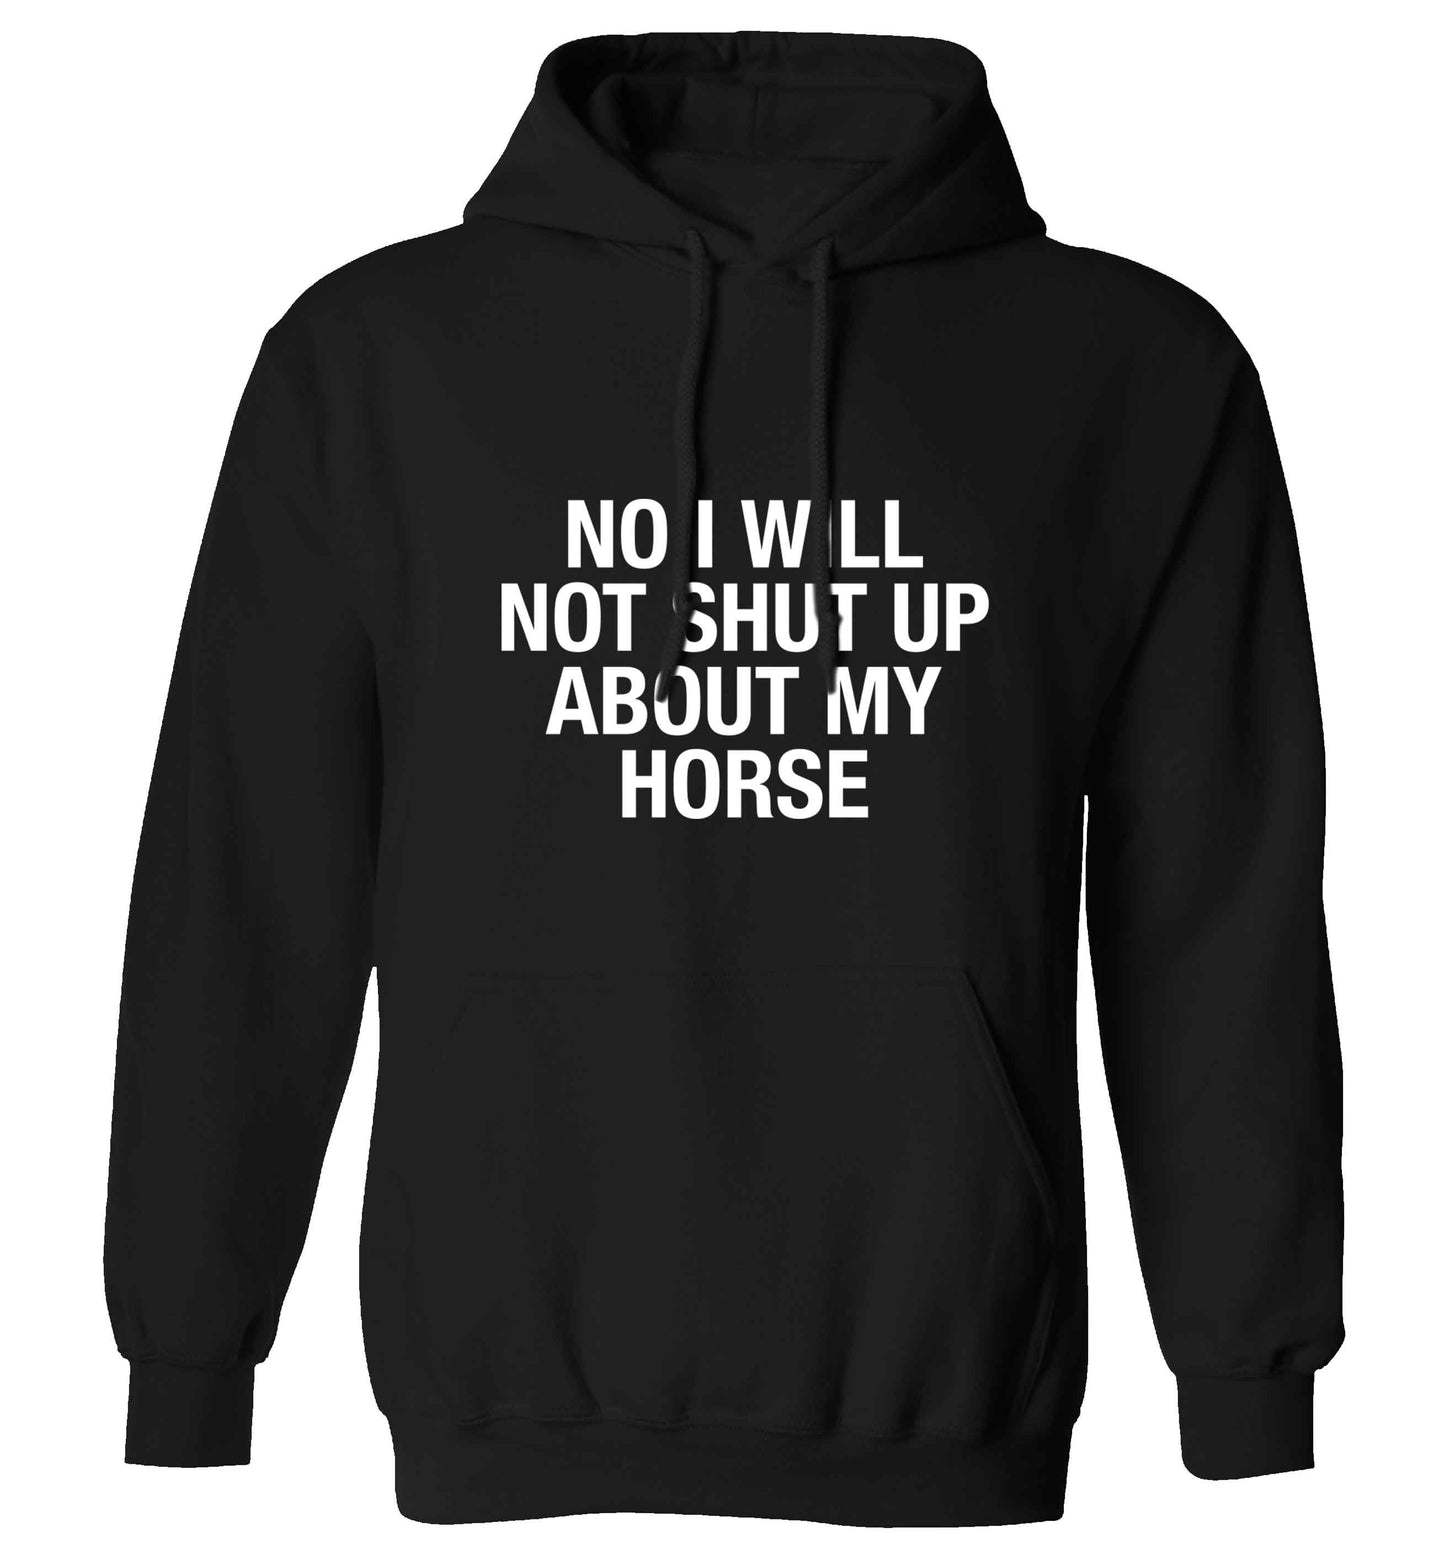 No I will not shut up talking about my horse adults unisex black hoodie 2XL